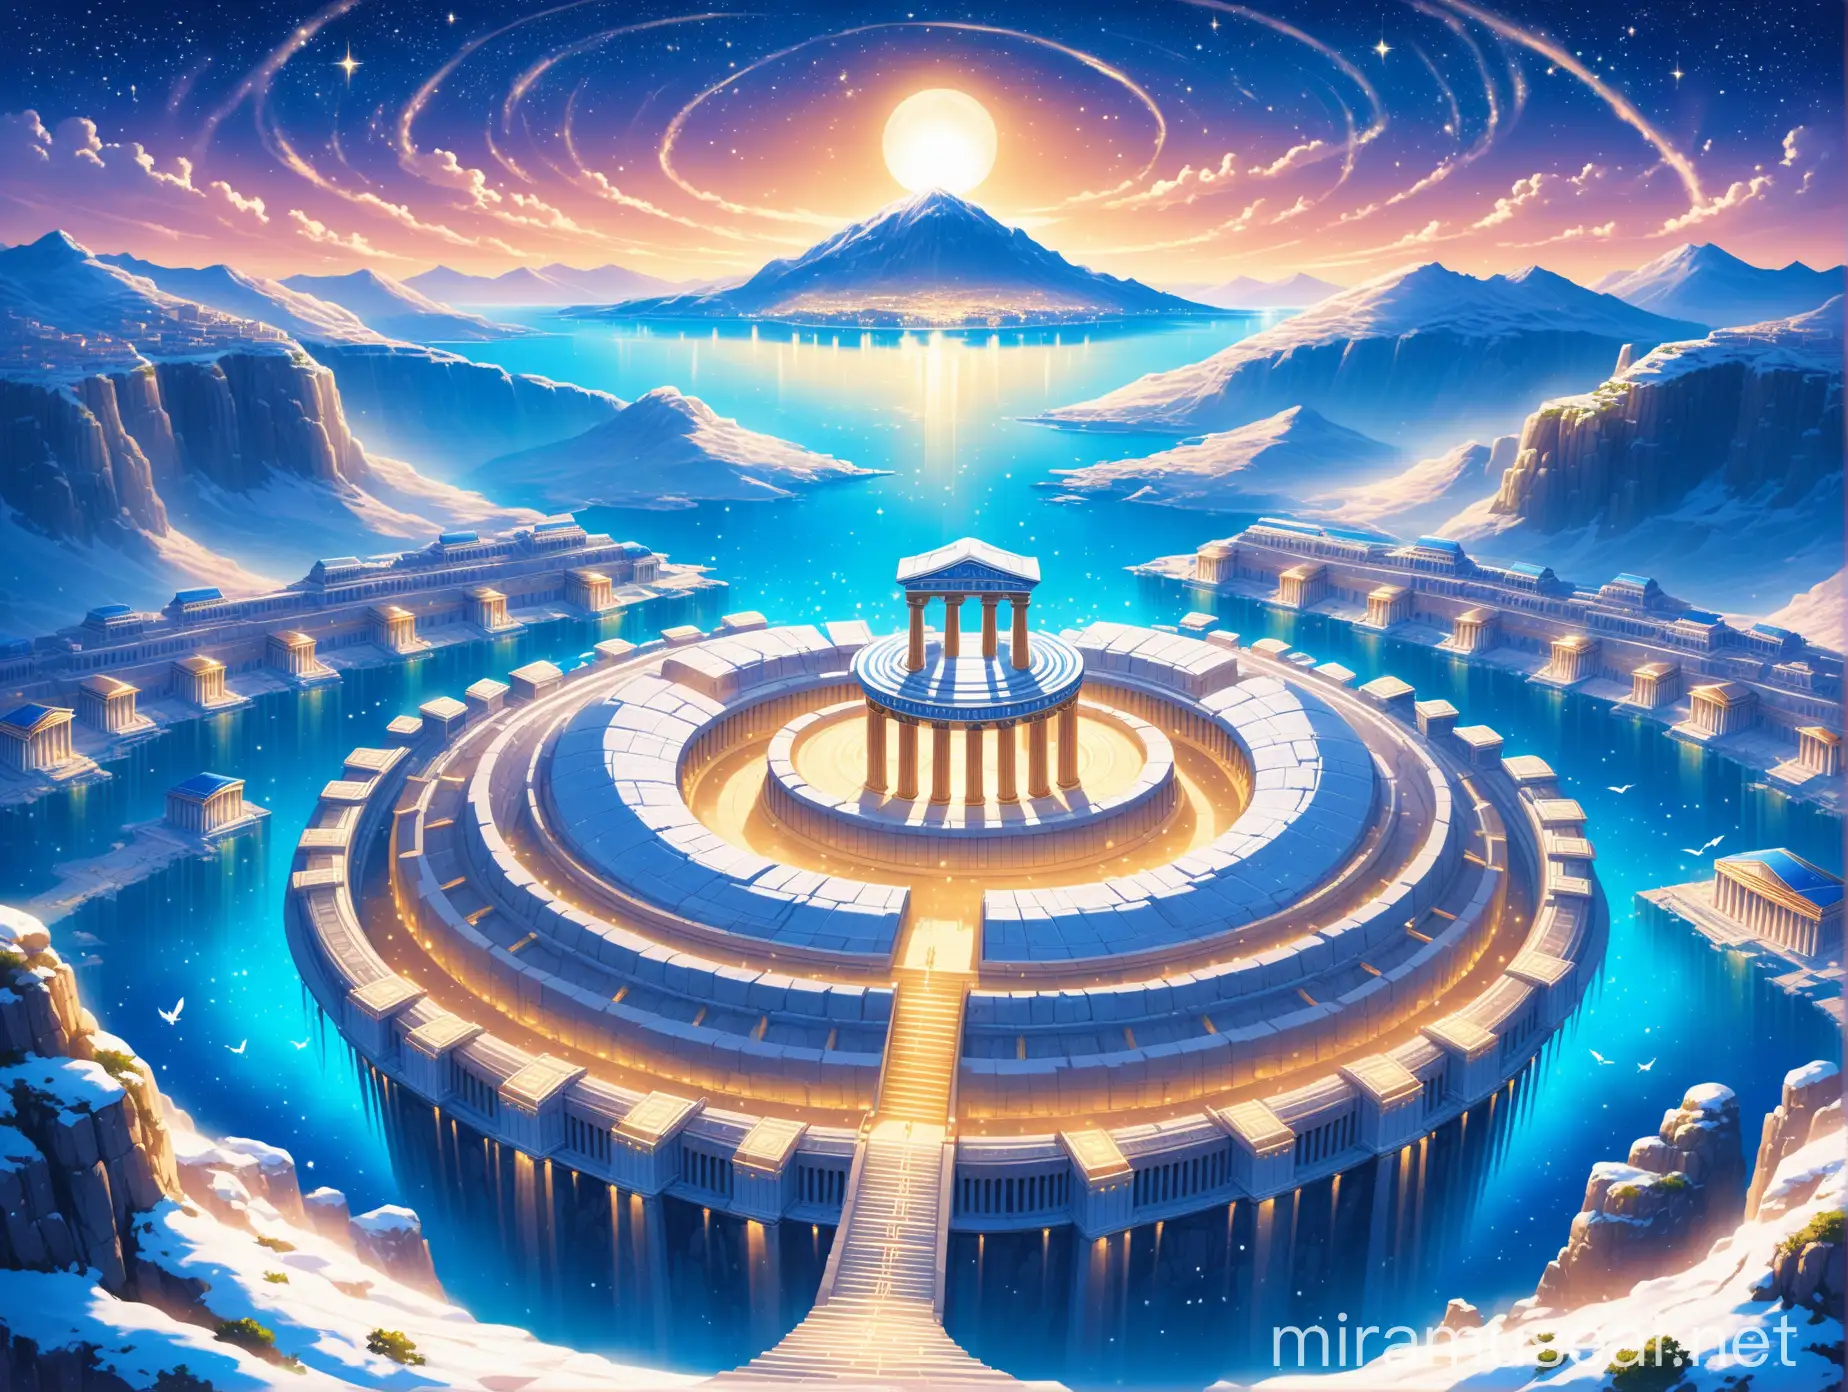 an ancient greek polis city on top of a snow-capped mountain in fantasy style, the buildings have magical coves, at the highest point is the magical ancient Greek temple with a magical starry blue roof, there are a few of magic winged creatures